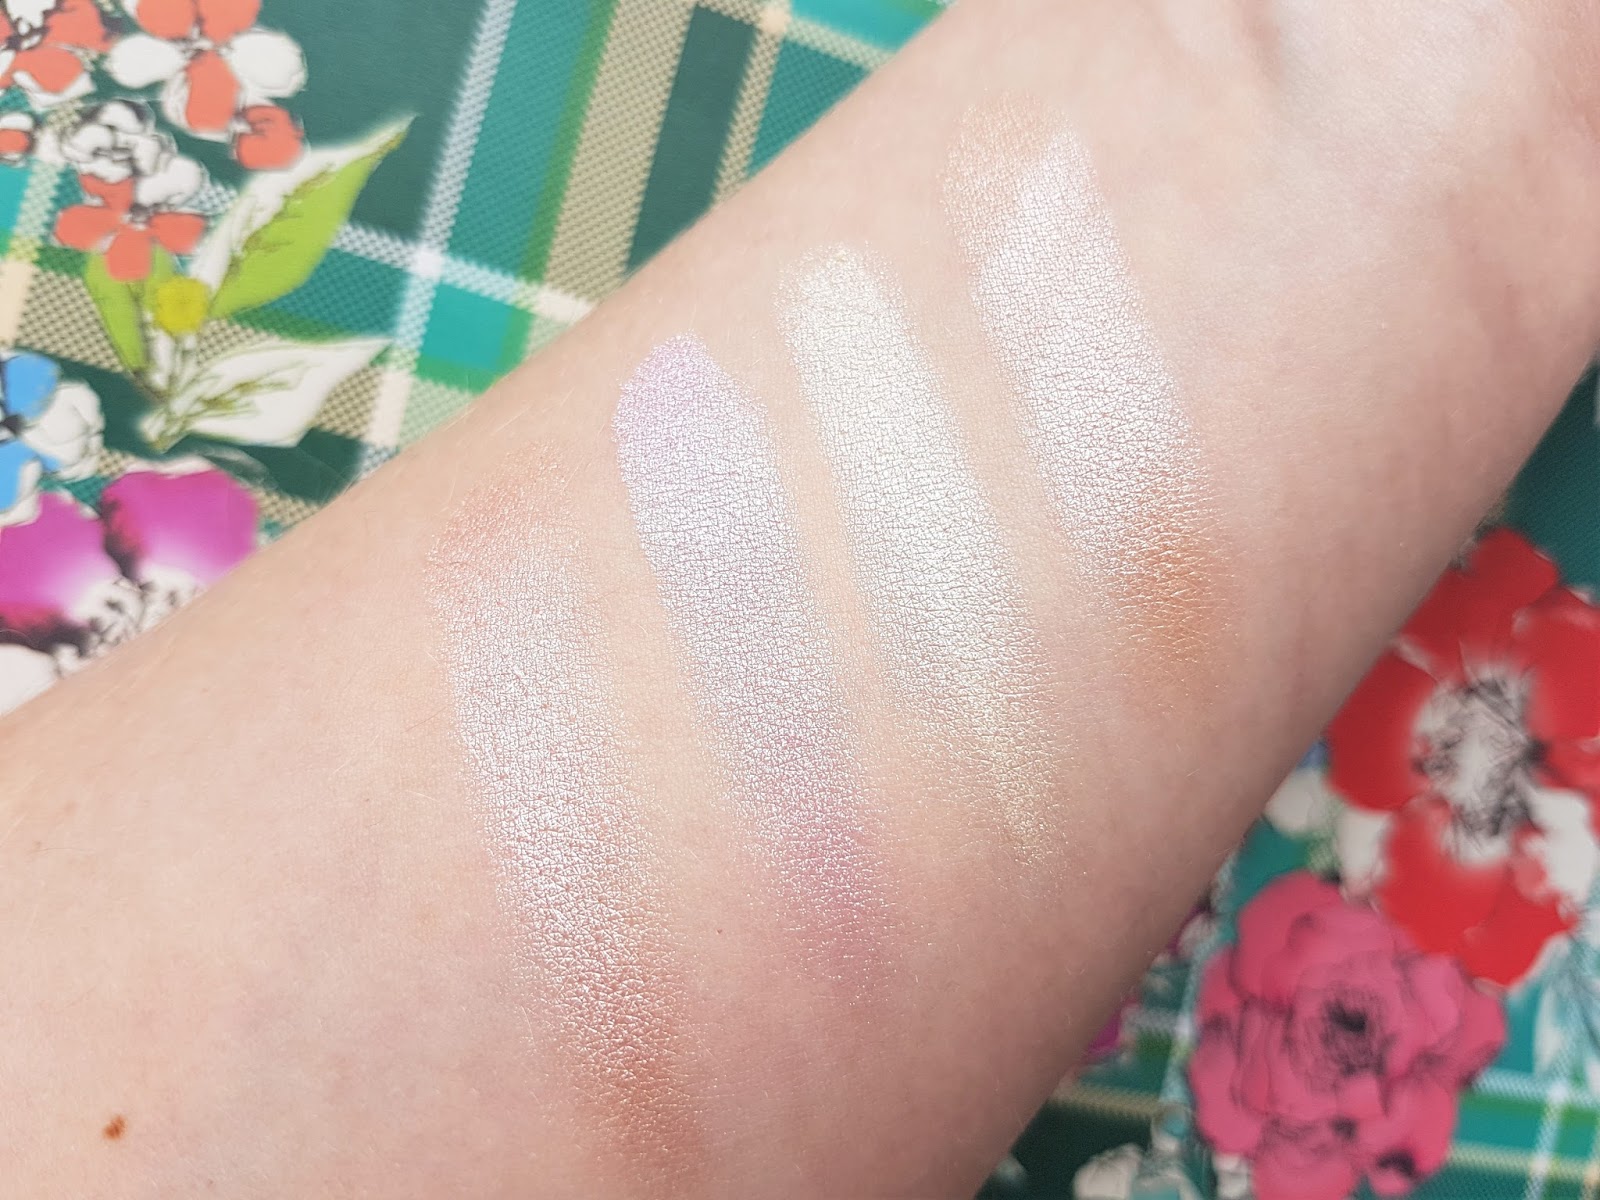 Sleek MakeUP Highlighting Palette in Solstice | Review & Swatches The Bookish Bluebird